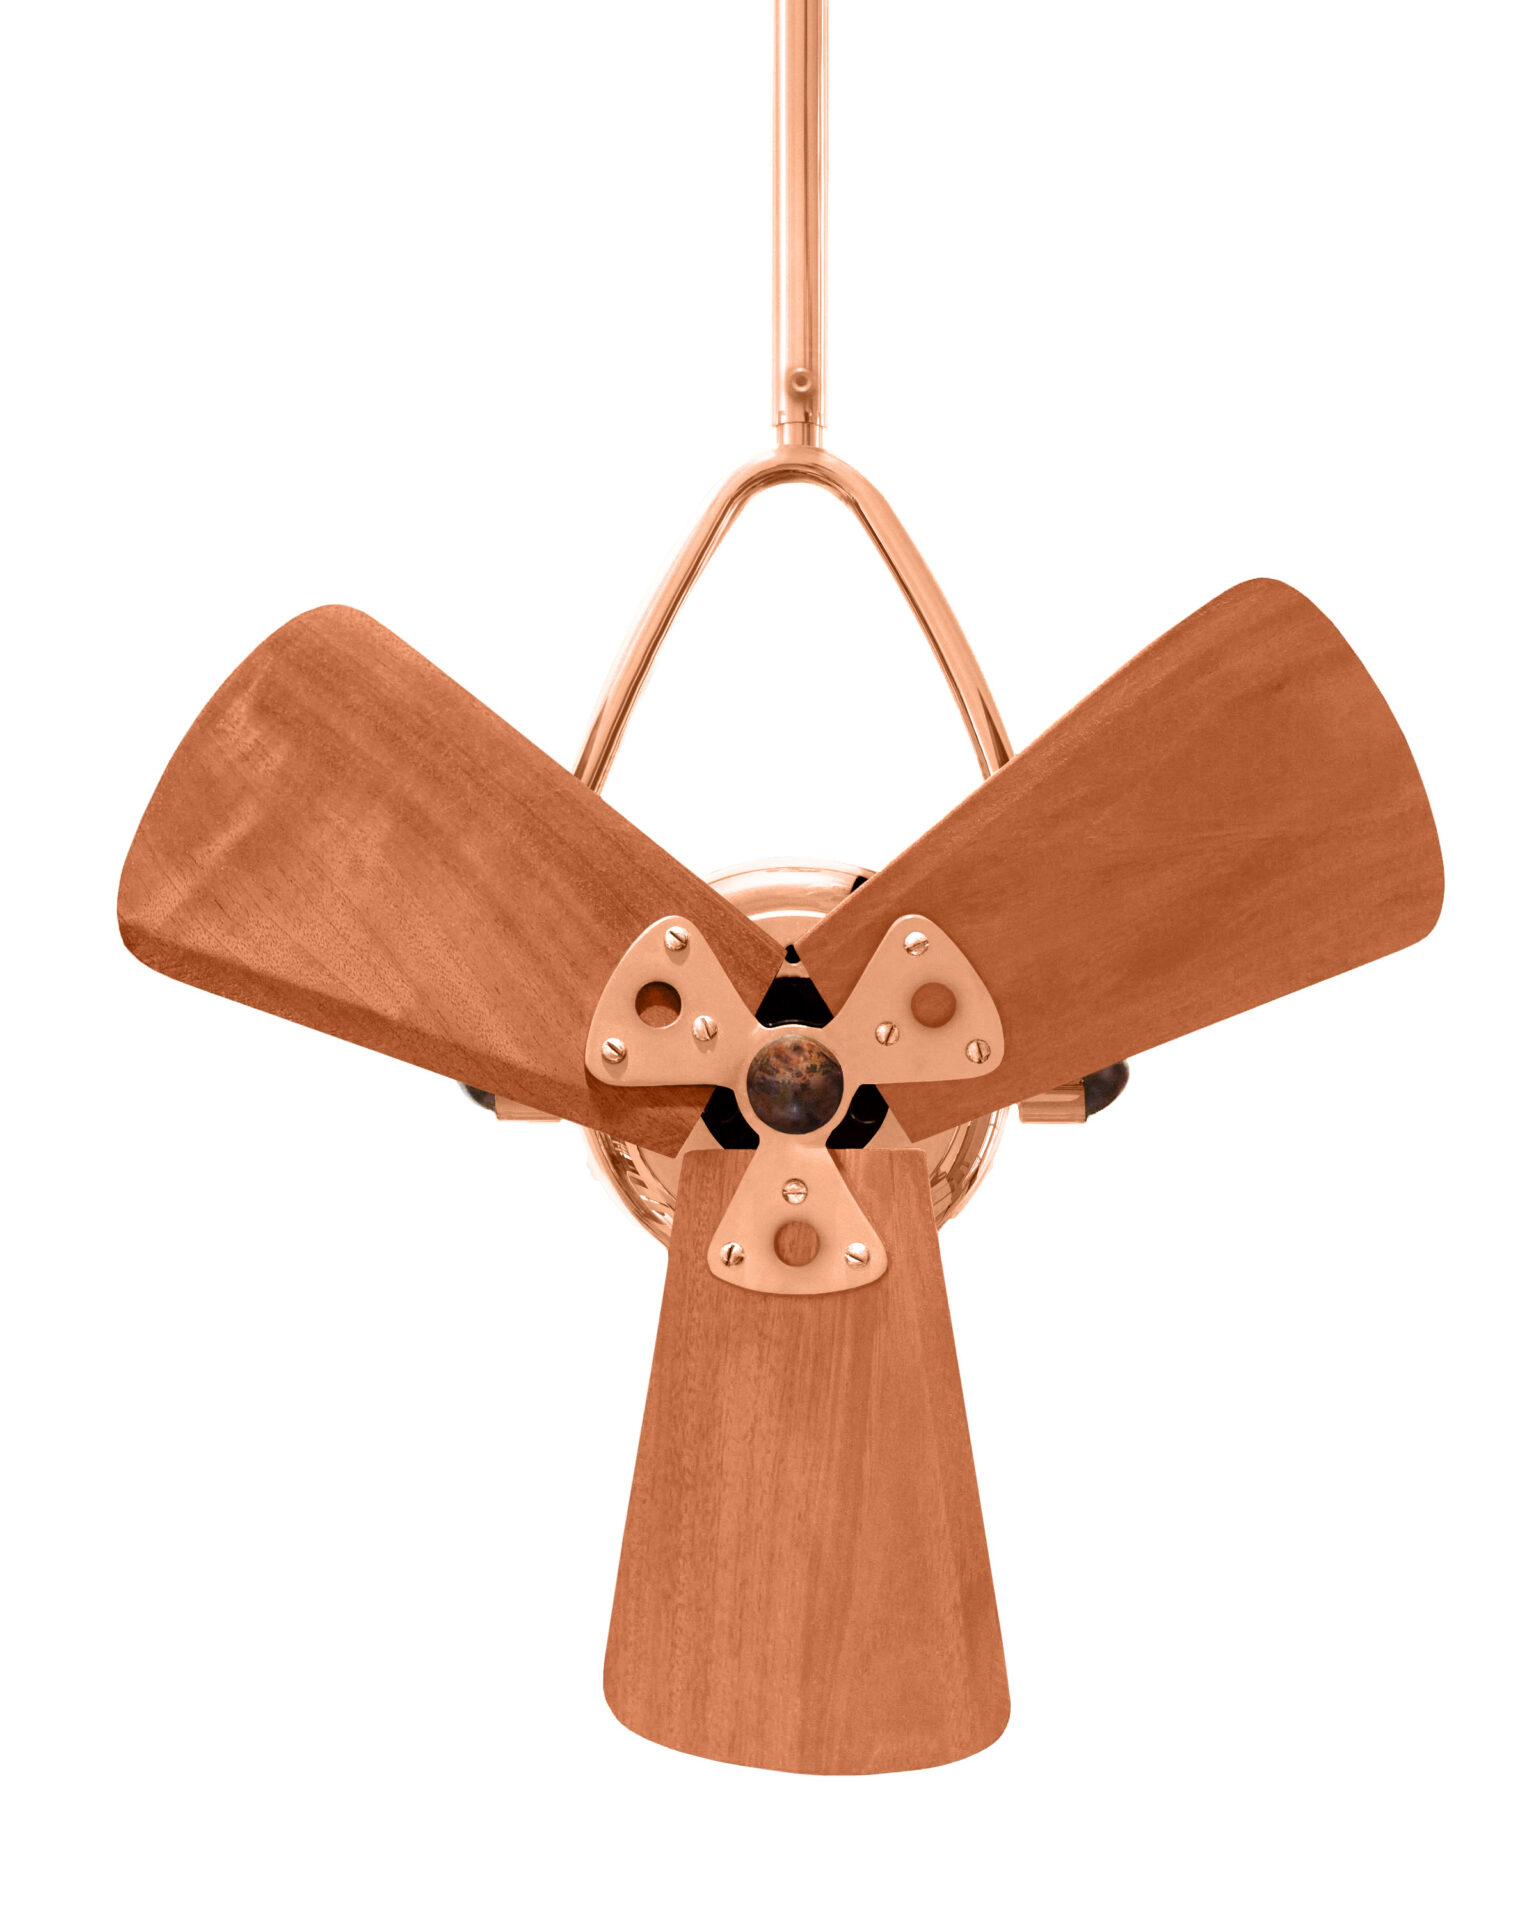 Jarold Direcional ceiling fan in polished copper finish with solid mahogany wood blades made by Matthews Fan Company.